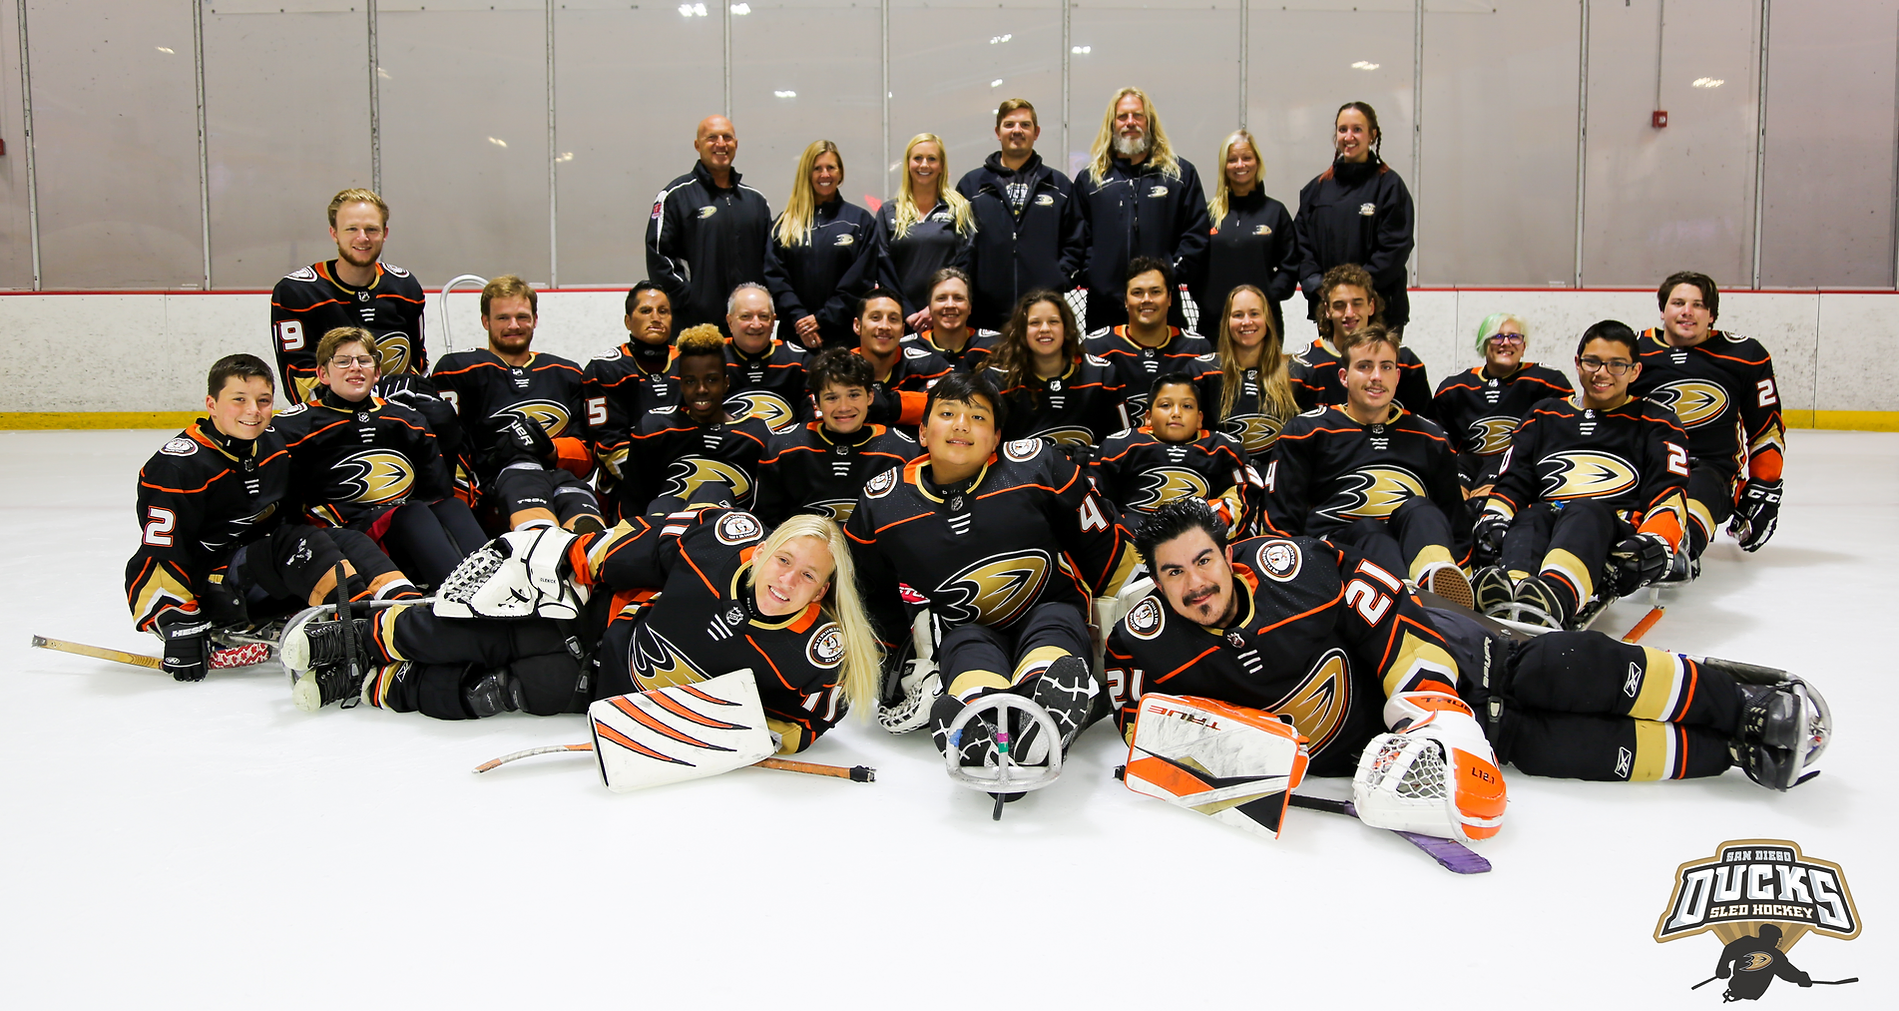 The San Diego Ducks Sled Hockey team poses for a team picture on the ice. 